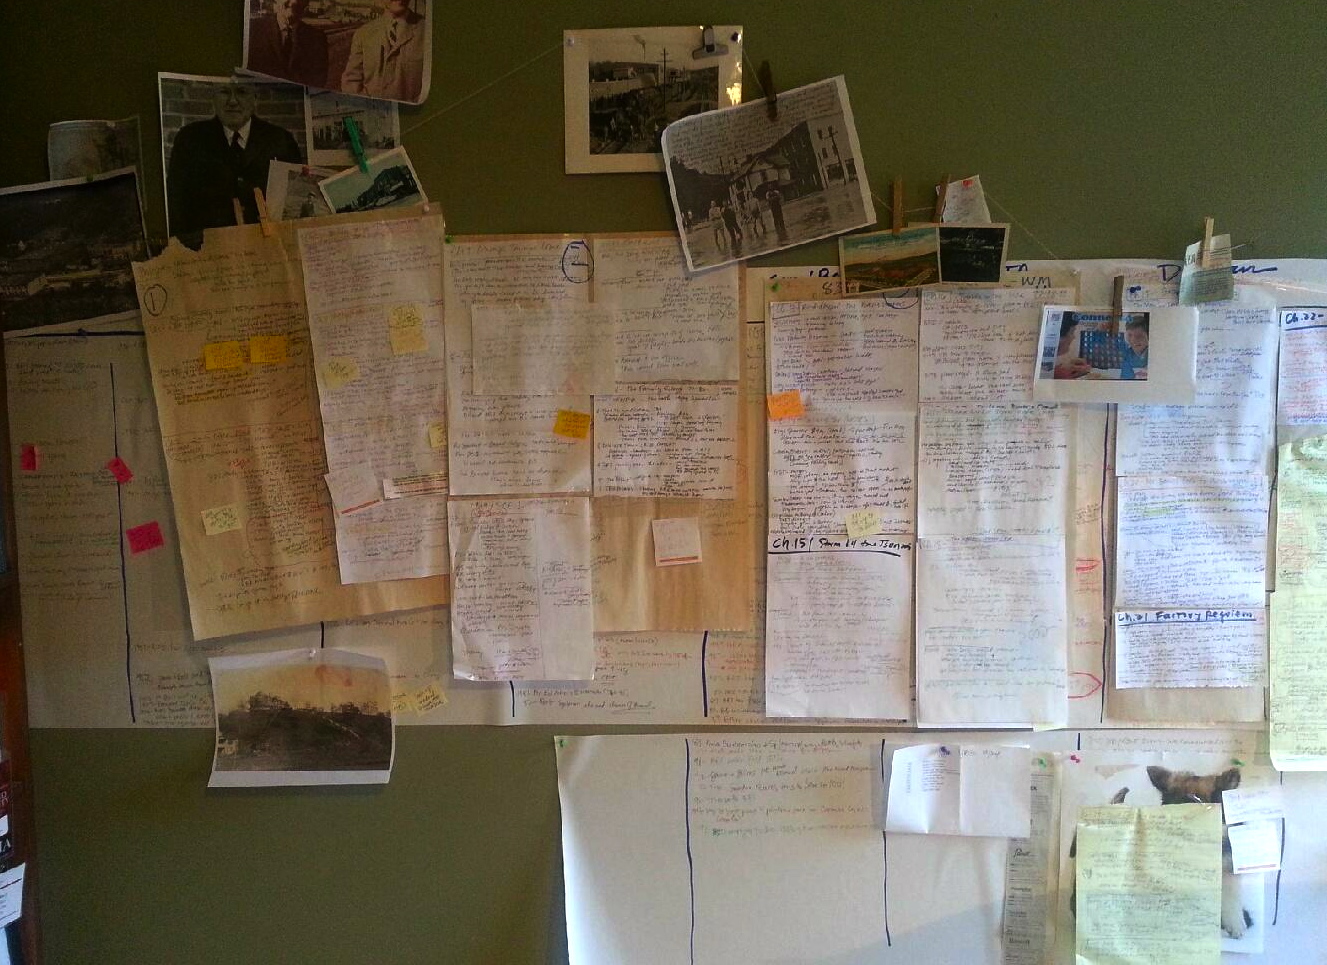     The wall of my home office was filled with timelines and reminders of things to add or change later. Stacks of archival [non-digitized] sources were chronologically arranged below the corresponding decade on the timeline.